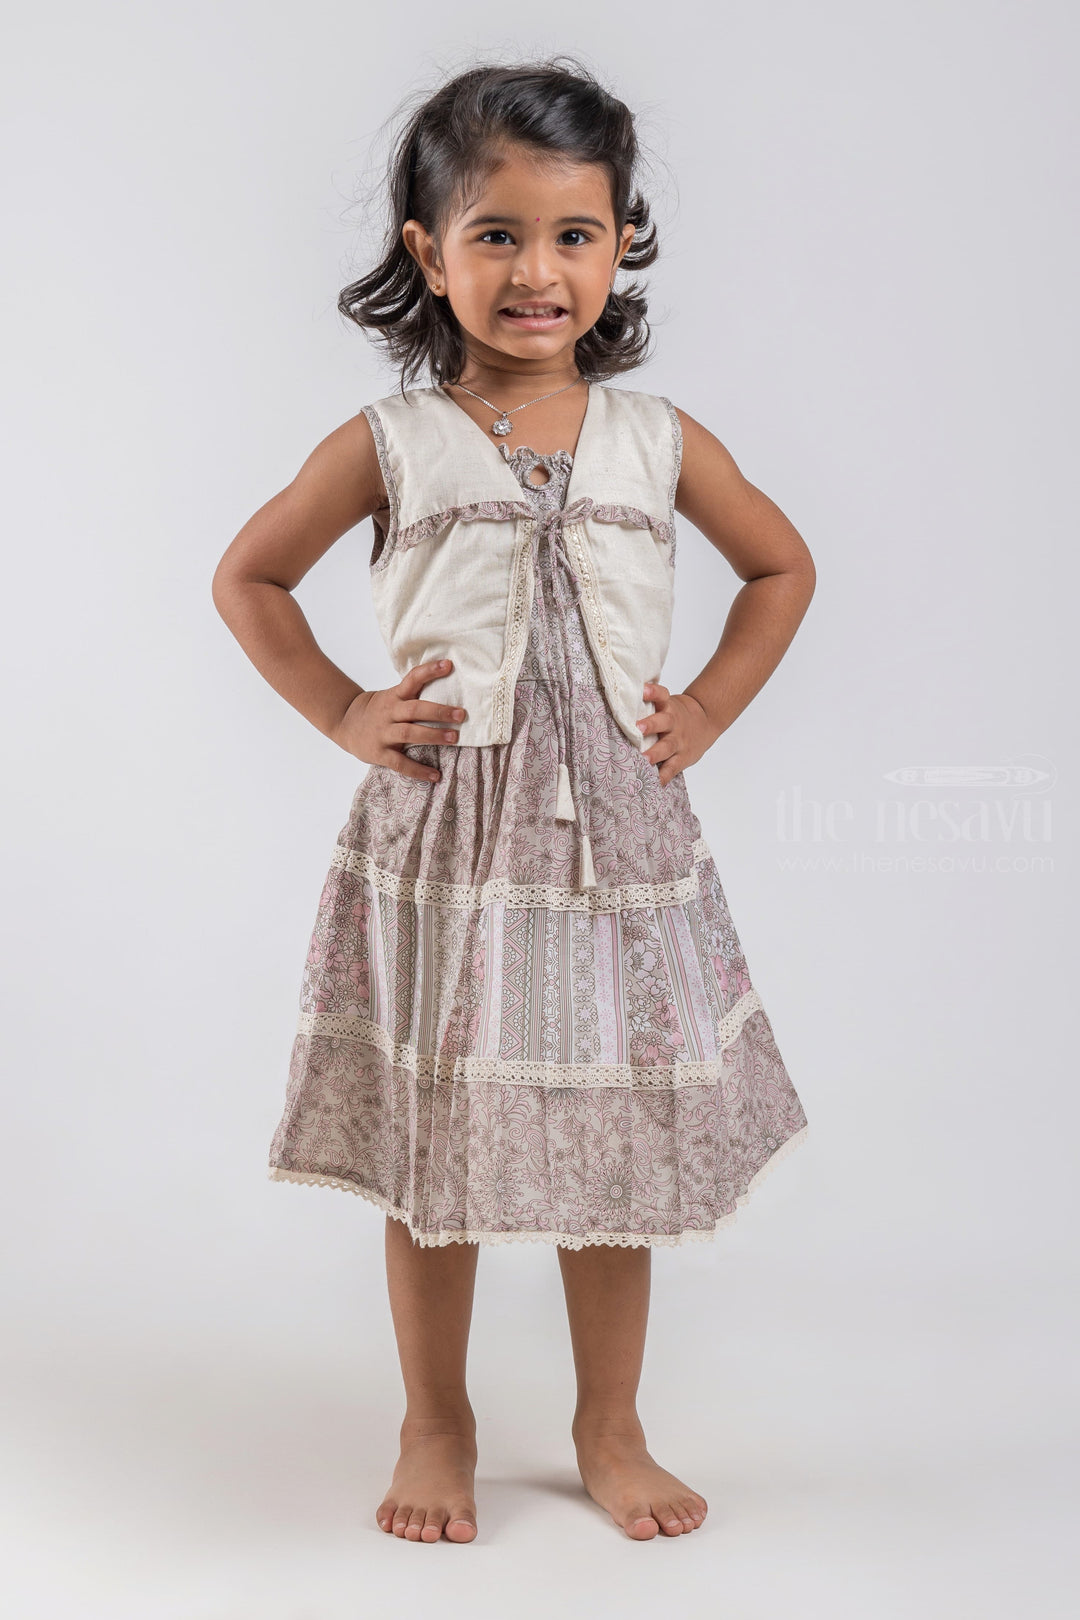 The Nesavu Girls Cotton Frock Beautiful Brown Floral Printed Pleated Girls Casual Cotton Frock With Overcoat Design psr silks Nesavu 16 (1Y) / Brown / Chanderi GFC1001A